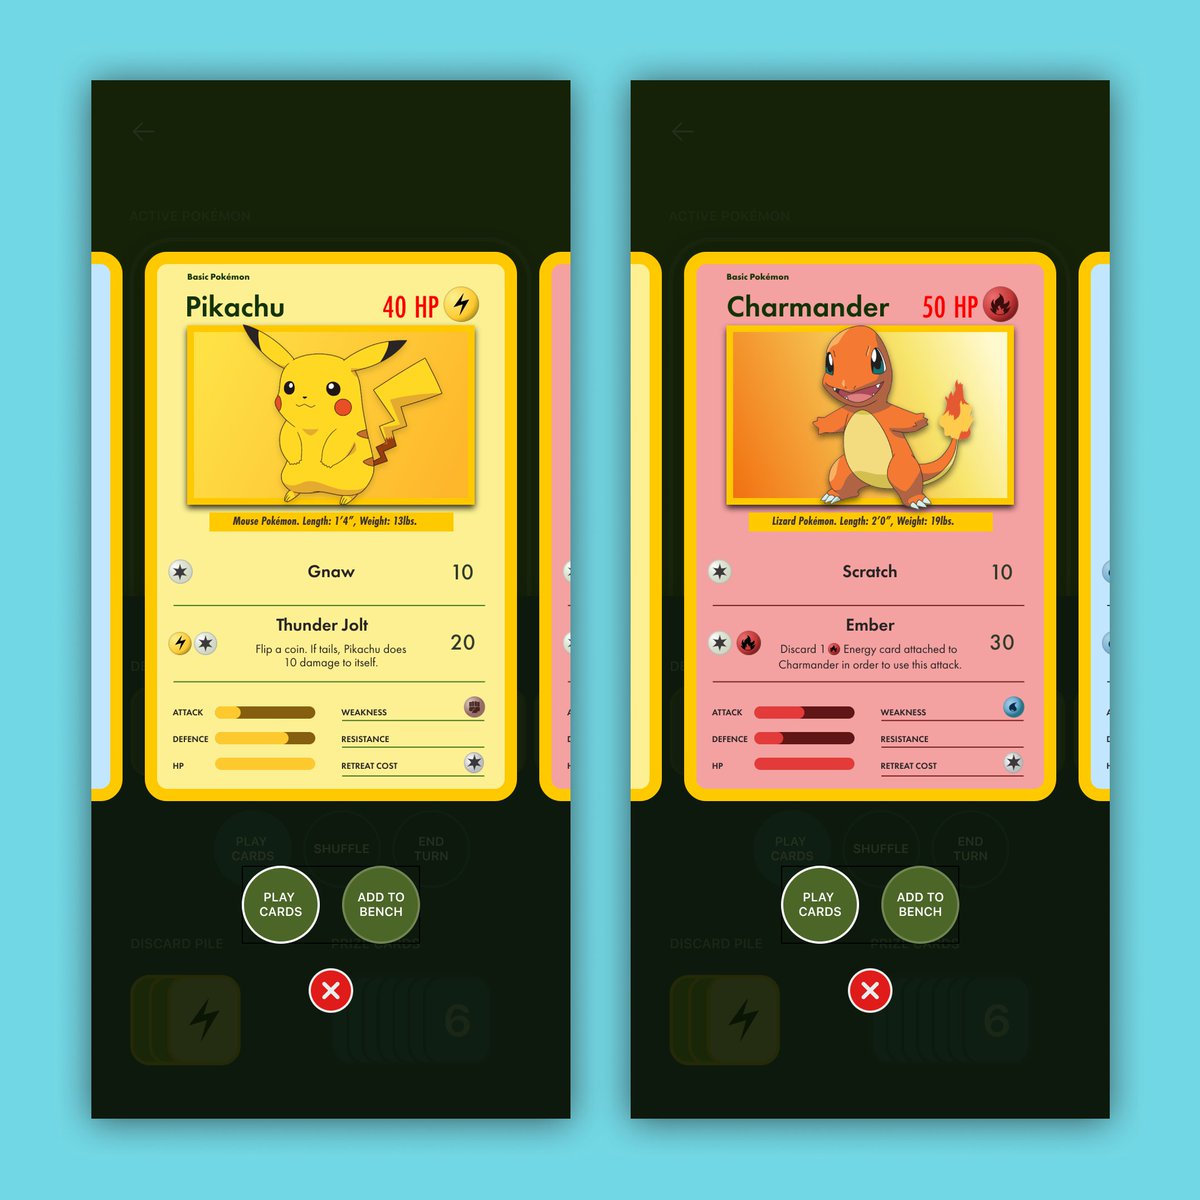 167 of 365 

Here's a re-design for the Pokémon trading card game app.

#productdesign #app #ui #ux #uxdesign #uidesign #application #userexperience #userinterface #designstudio #design #appdesigner #appdesign #designapp #uxdesigner #uidesigner